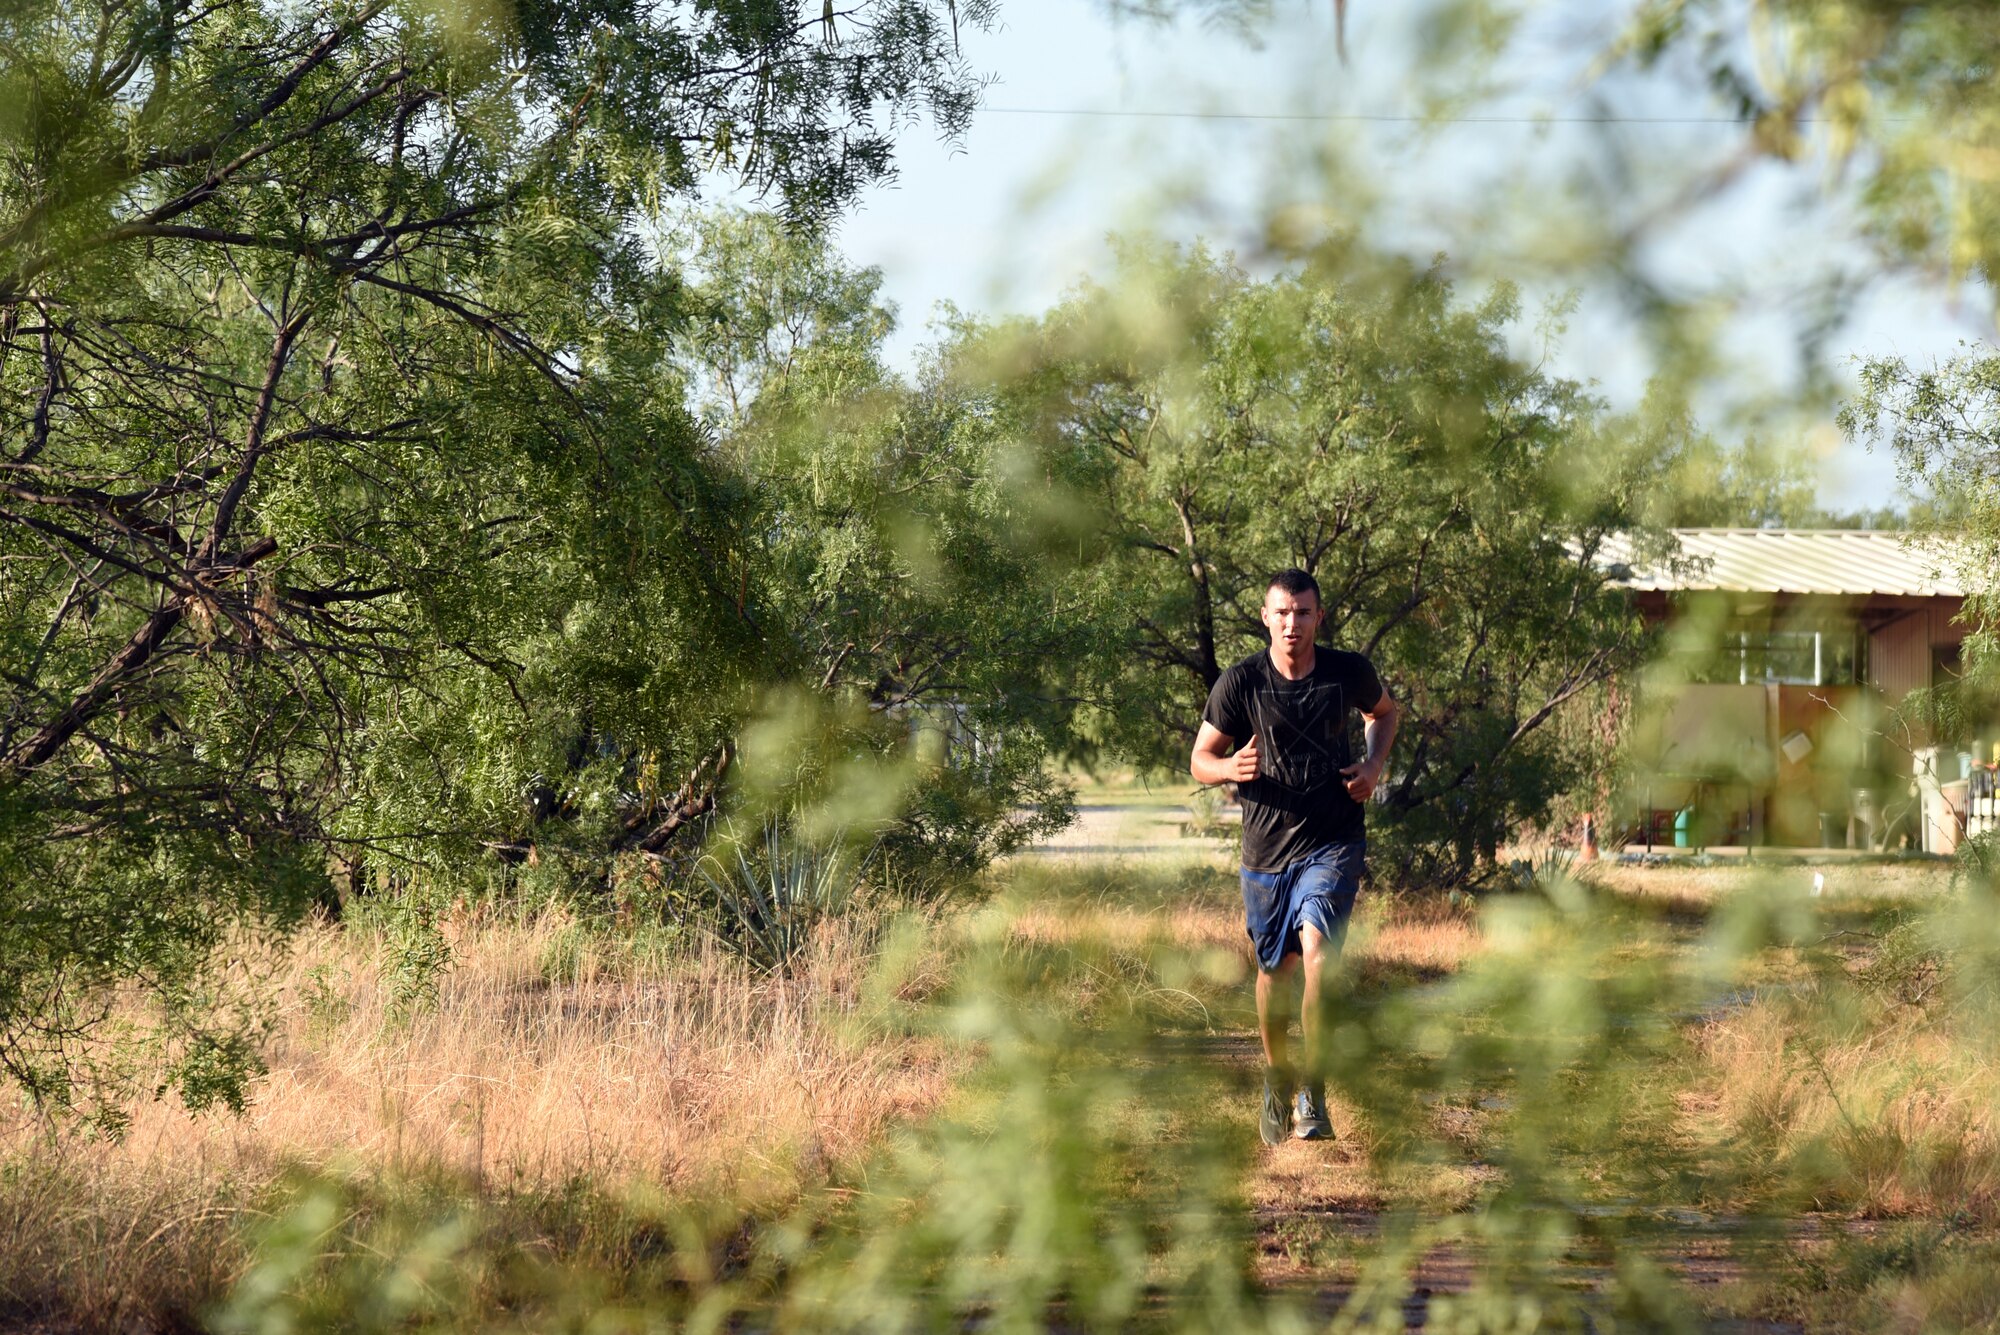 U.S. Army Pvt. Conner McCage, 344th Military Intelligence Battalion trainee, runs through a wooded area during the 344th MI BN mud run near the Camp Sentinel training area on Goodfellow Air Force Base, Texas, July 7, 2018. The mud run consisted of a 2.2 mile course and featured several obstacles. (U.S. Air Force photo by Staff Sgt. Joshua Edwards/Released)